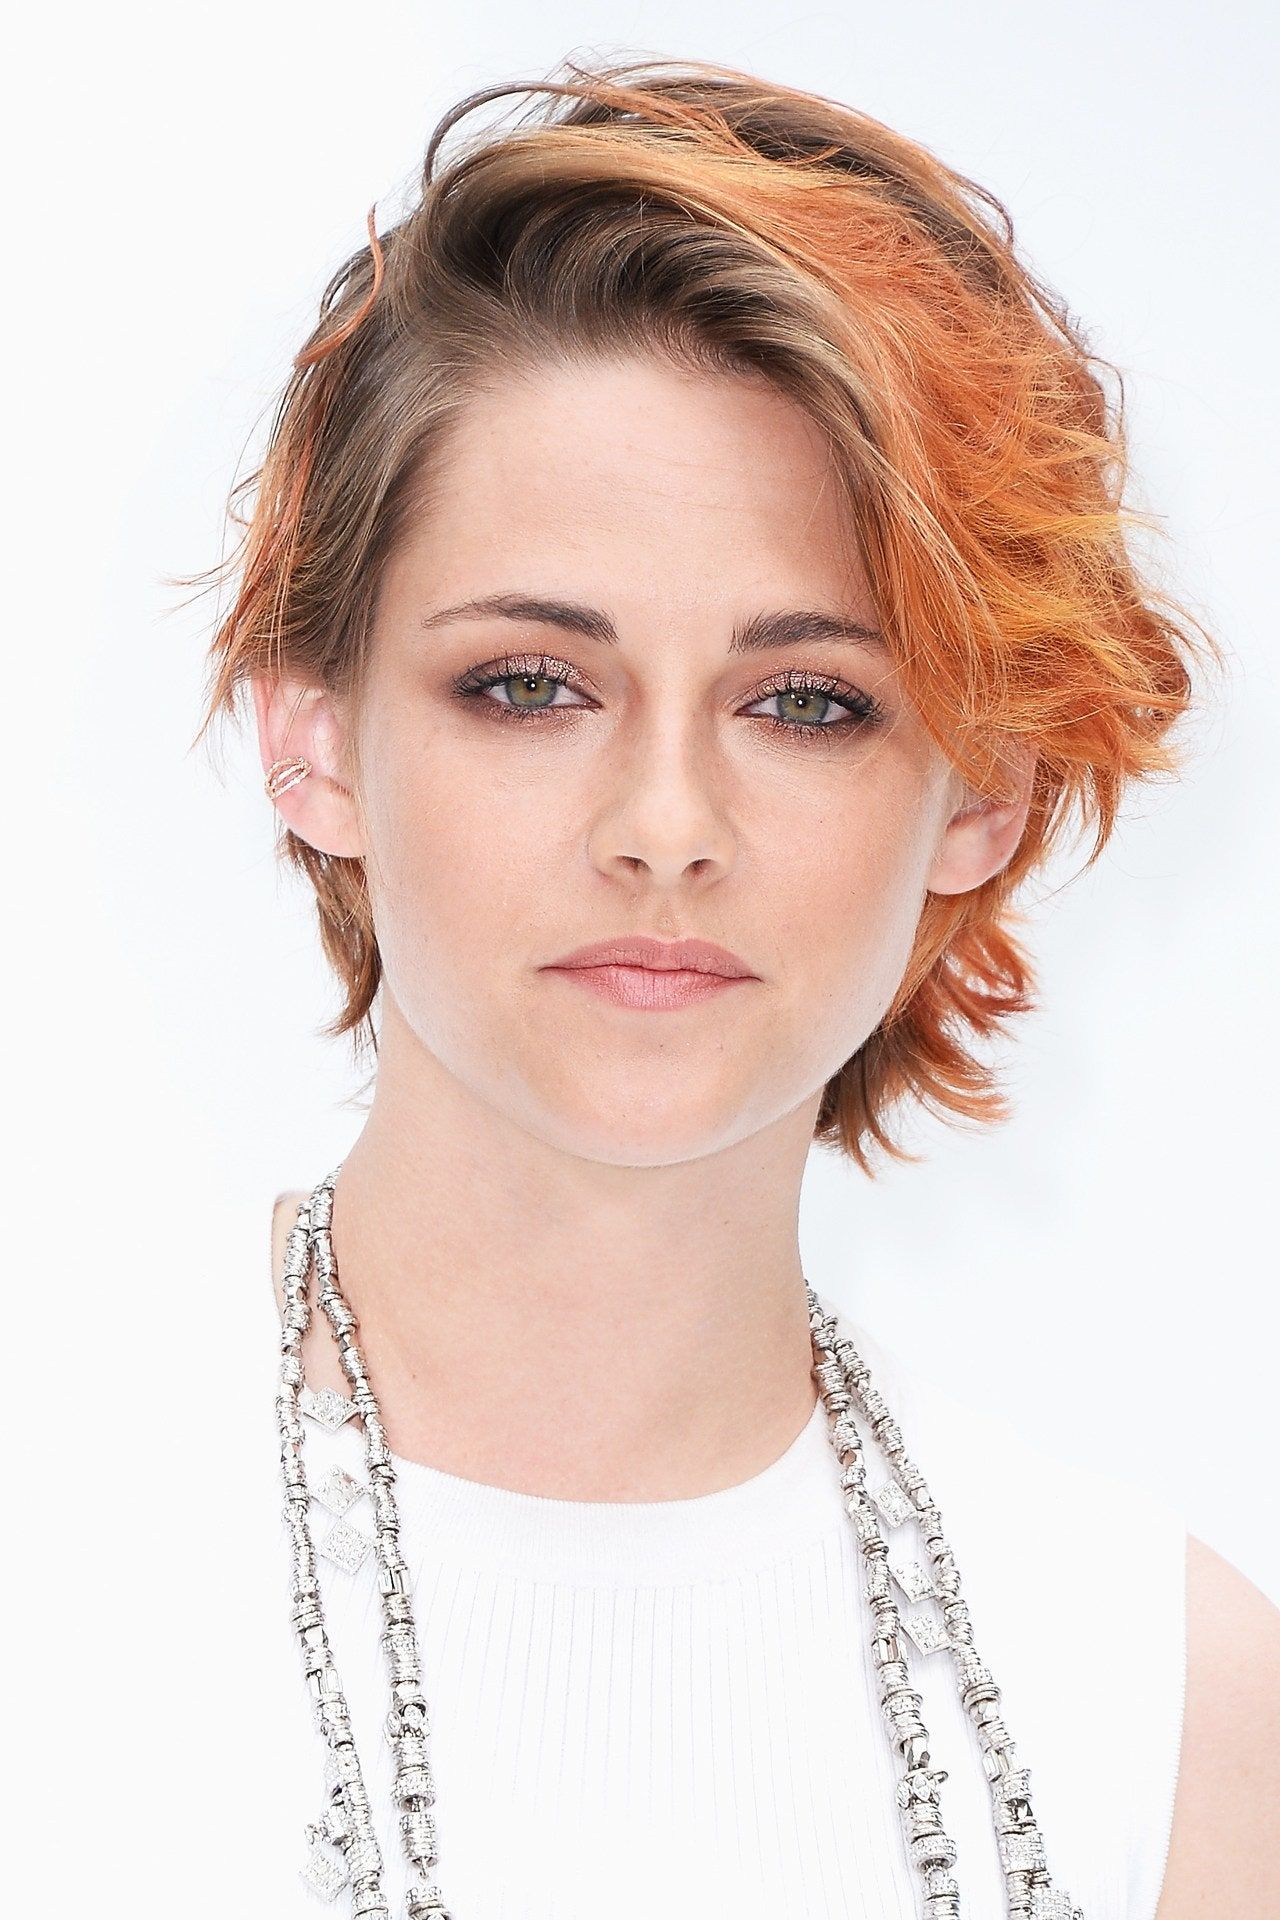 Kristen Stewart Hairstyle, Hair & Colour Picture 2002 to 2012 (Vogue.com UK)